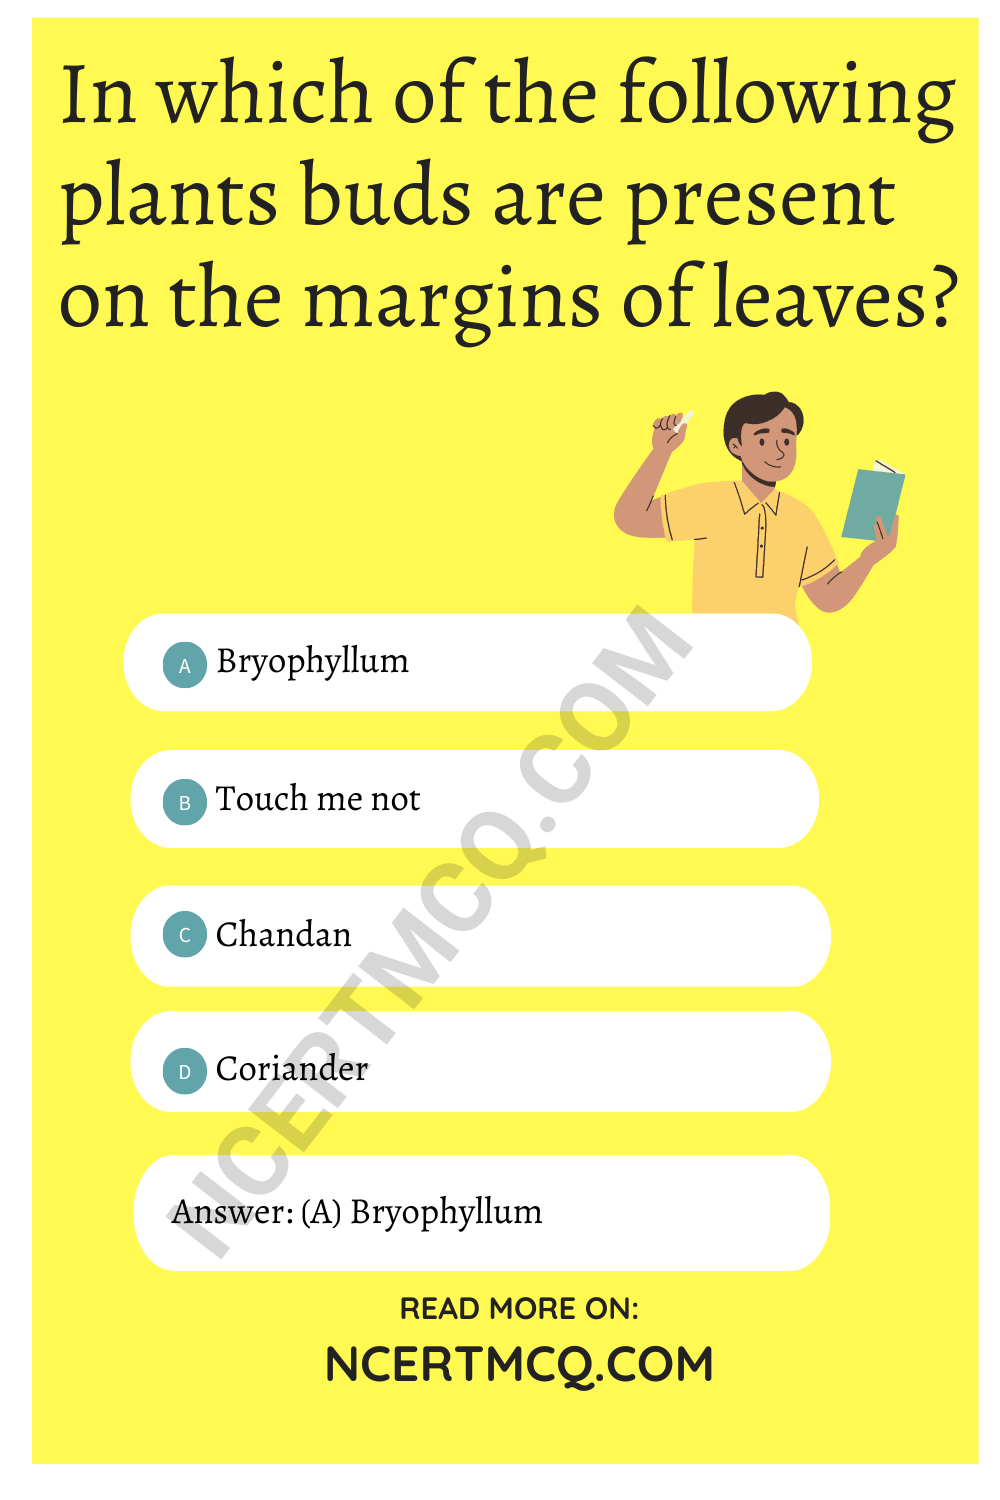 In which of the following plants buds are present on the margins of leaves?